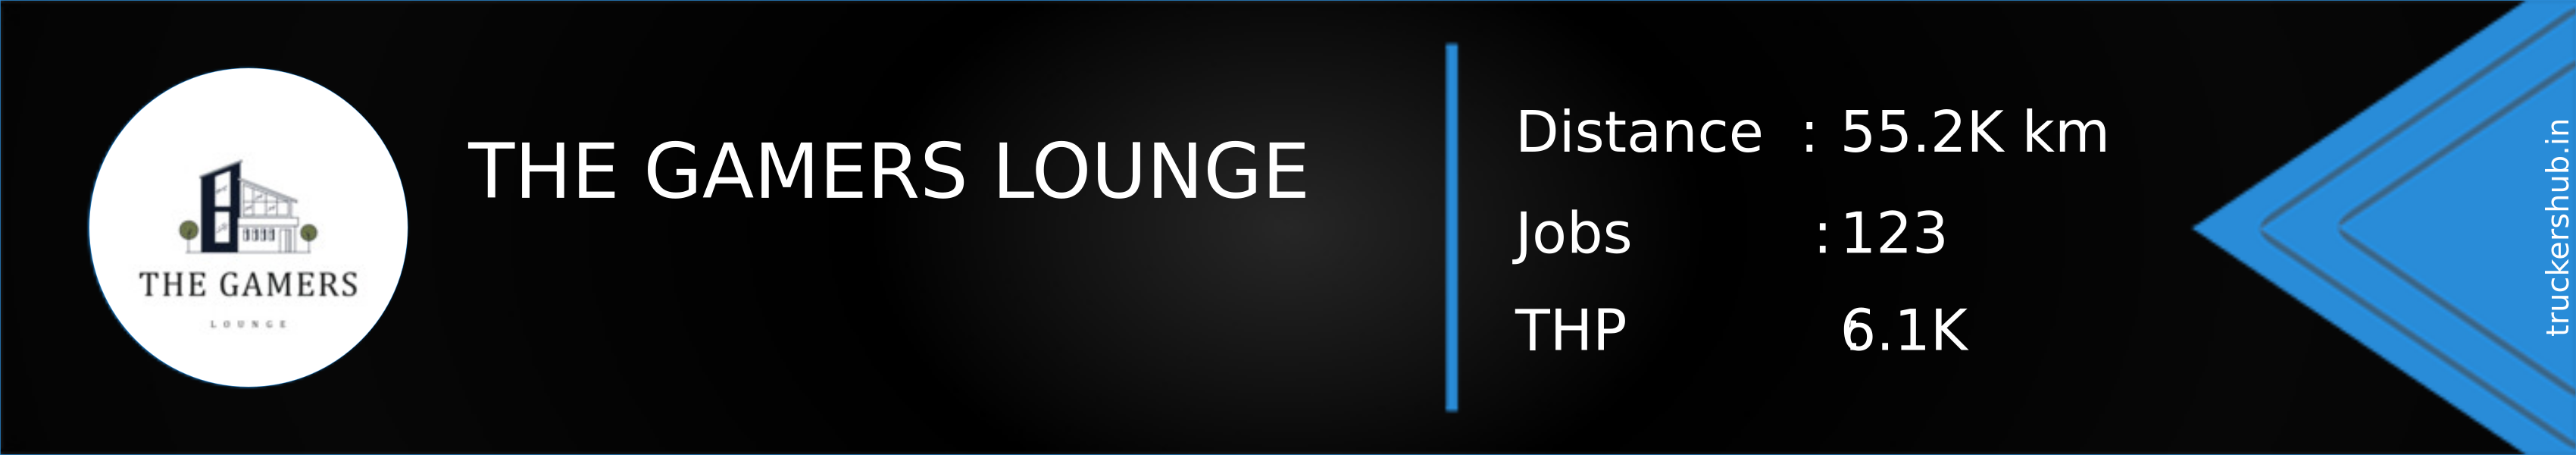 THE GAMERS LOUNGE Banner